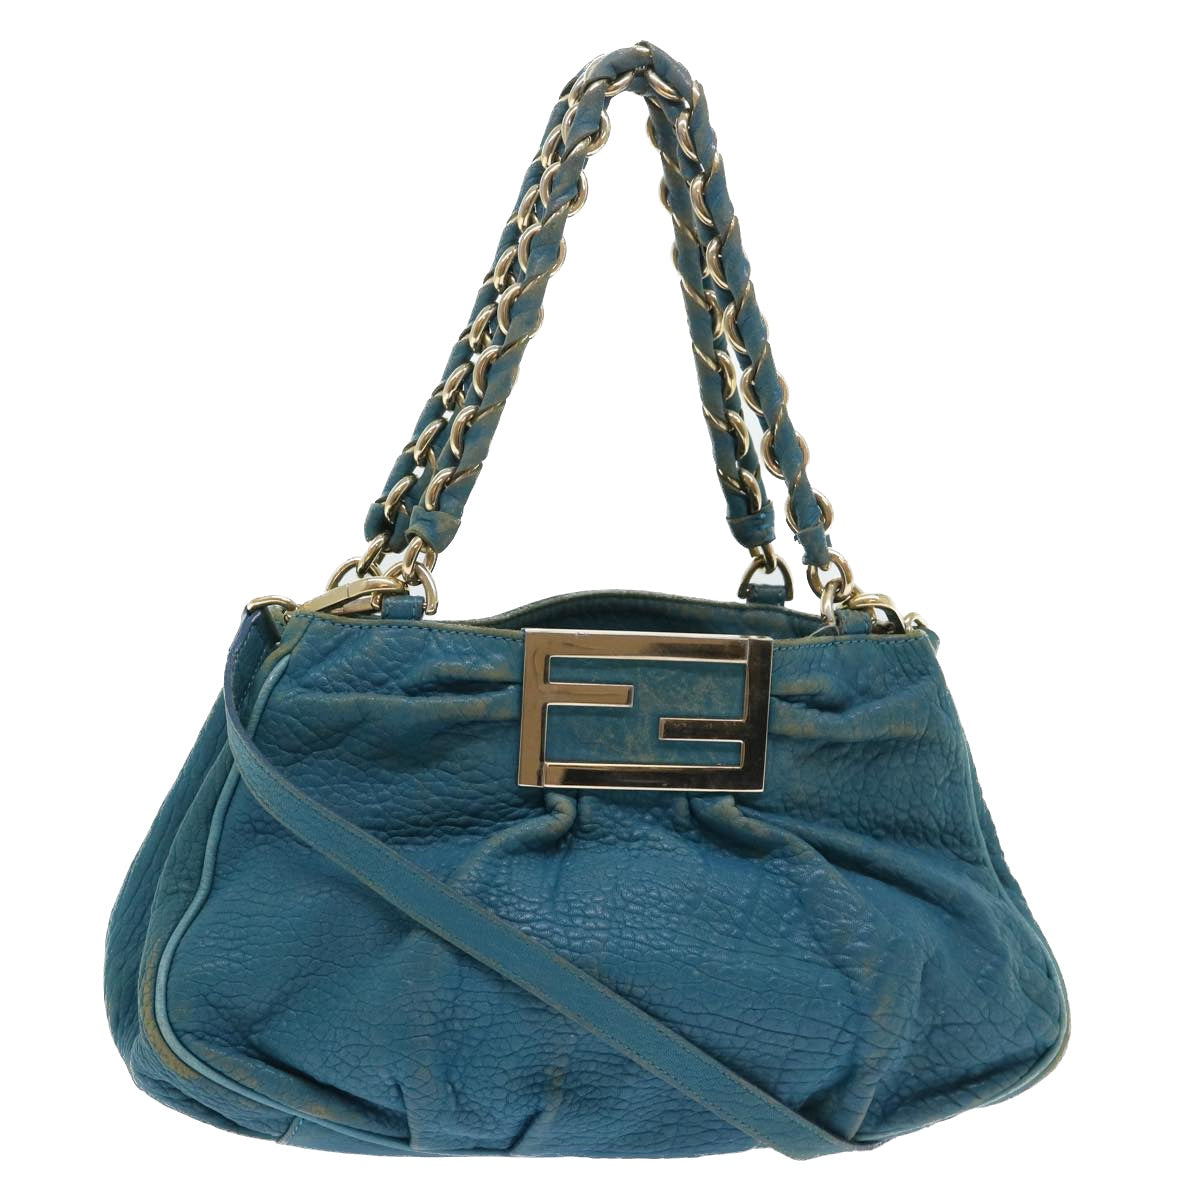 FENDI Chain Shoulder Bag Leather 2way Turquoise Blue Auth 52739